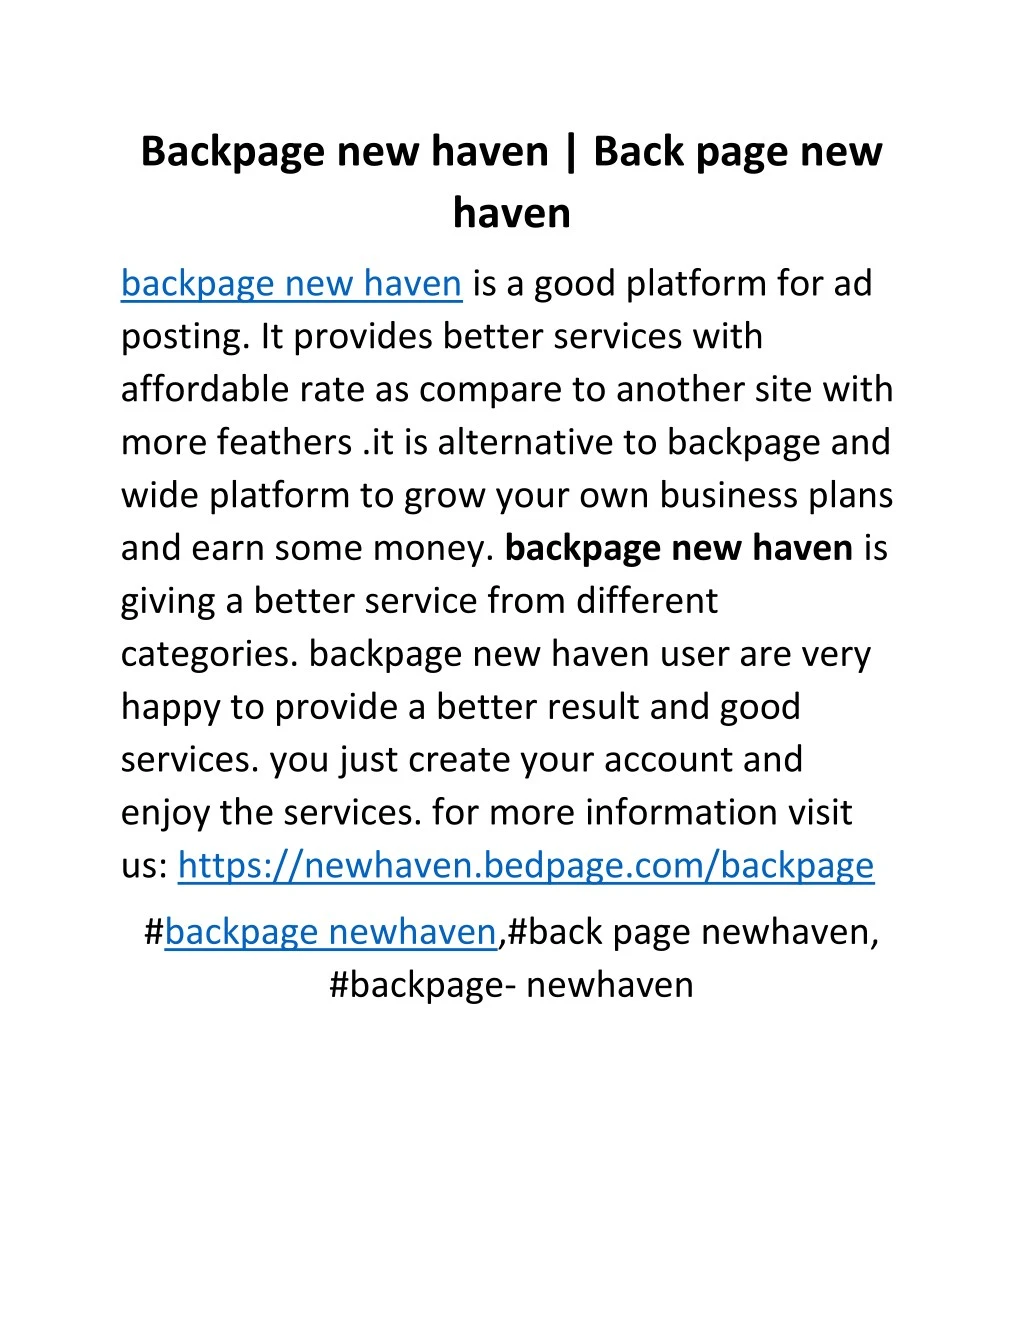 backpage new haven back page new haven